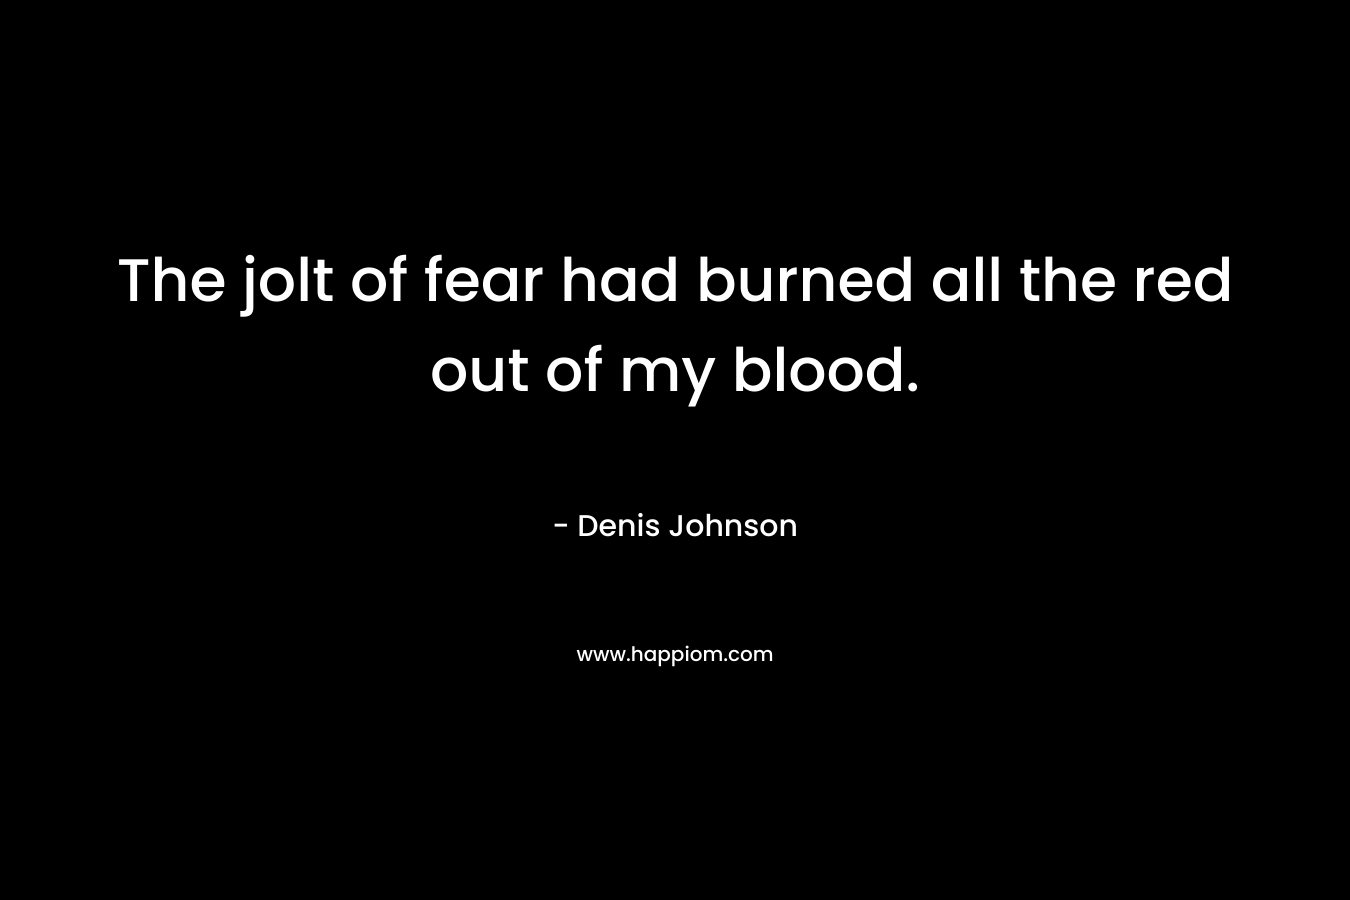 The jolt of fear had burned all the red out of my blood.